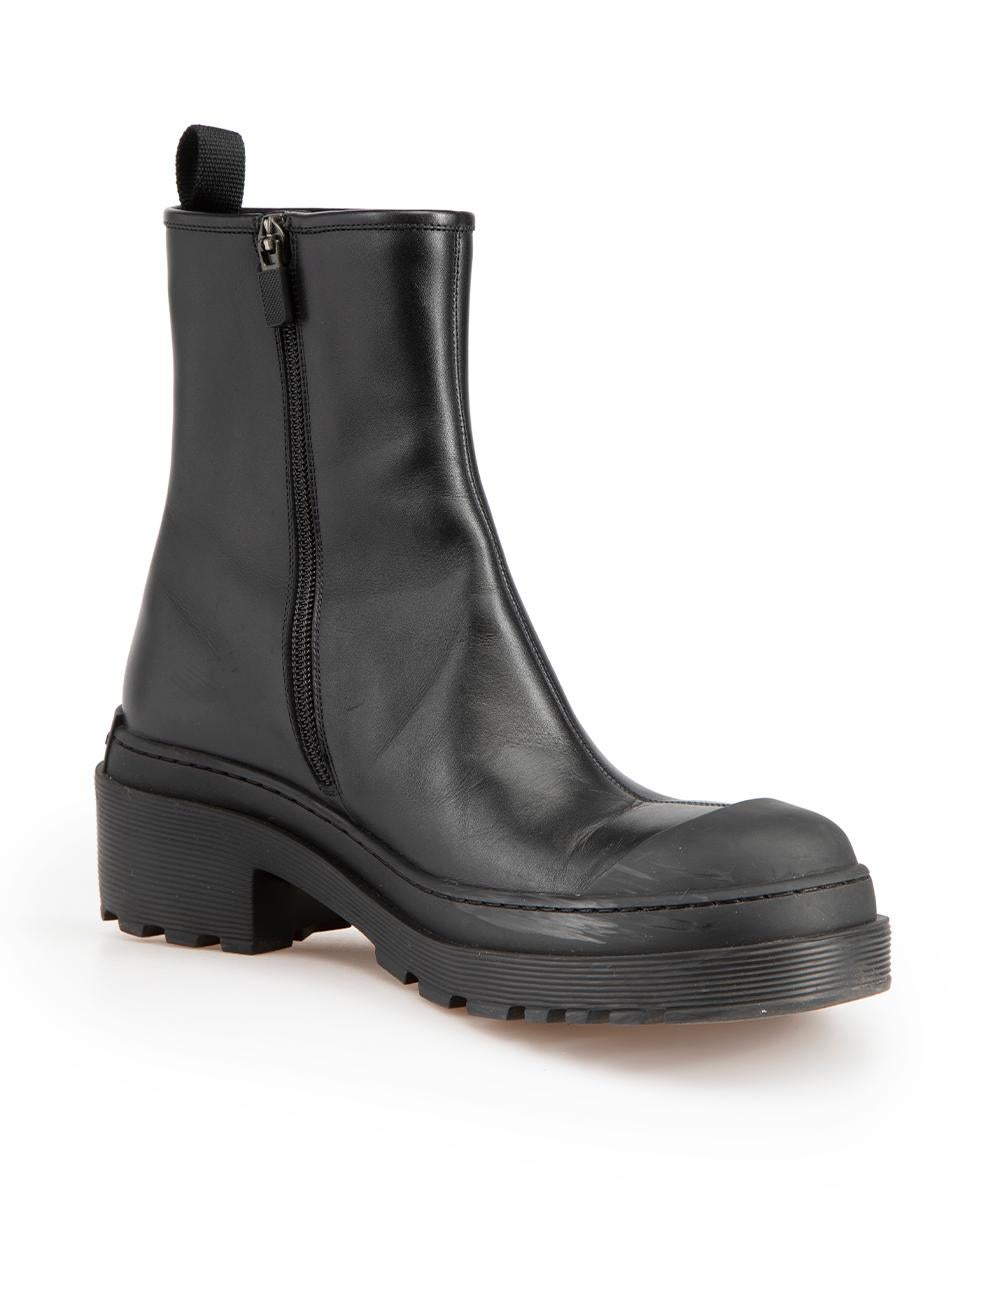 CONDITION is Very good. Minimal wear to boots is evident. Minimal wear to both boot trims and toe caps with abrasions to the rubber, as well as scratches to the leather at the left-side of both boots on this used Dior designer resale